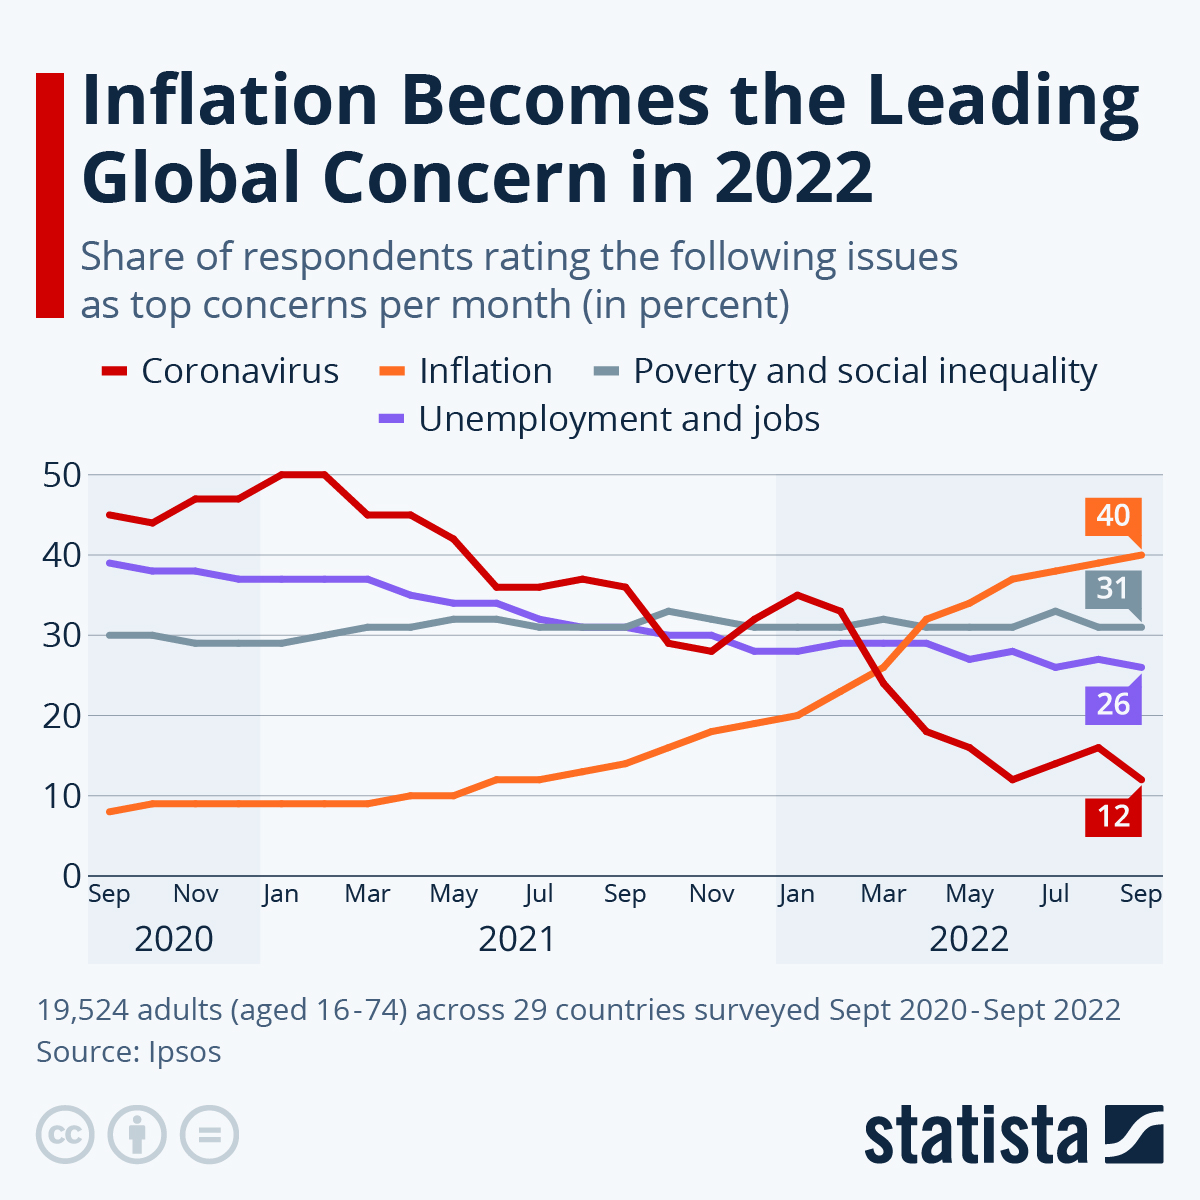 Inflation Becomes the Leading Global Concern in 2022
